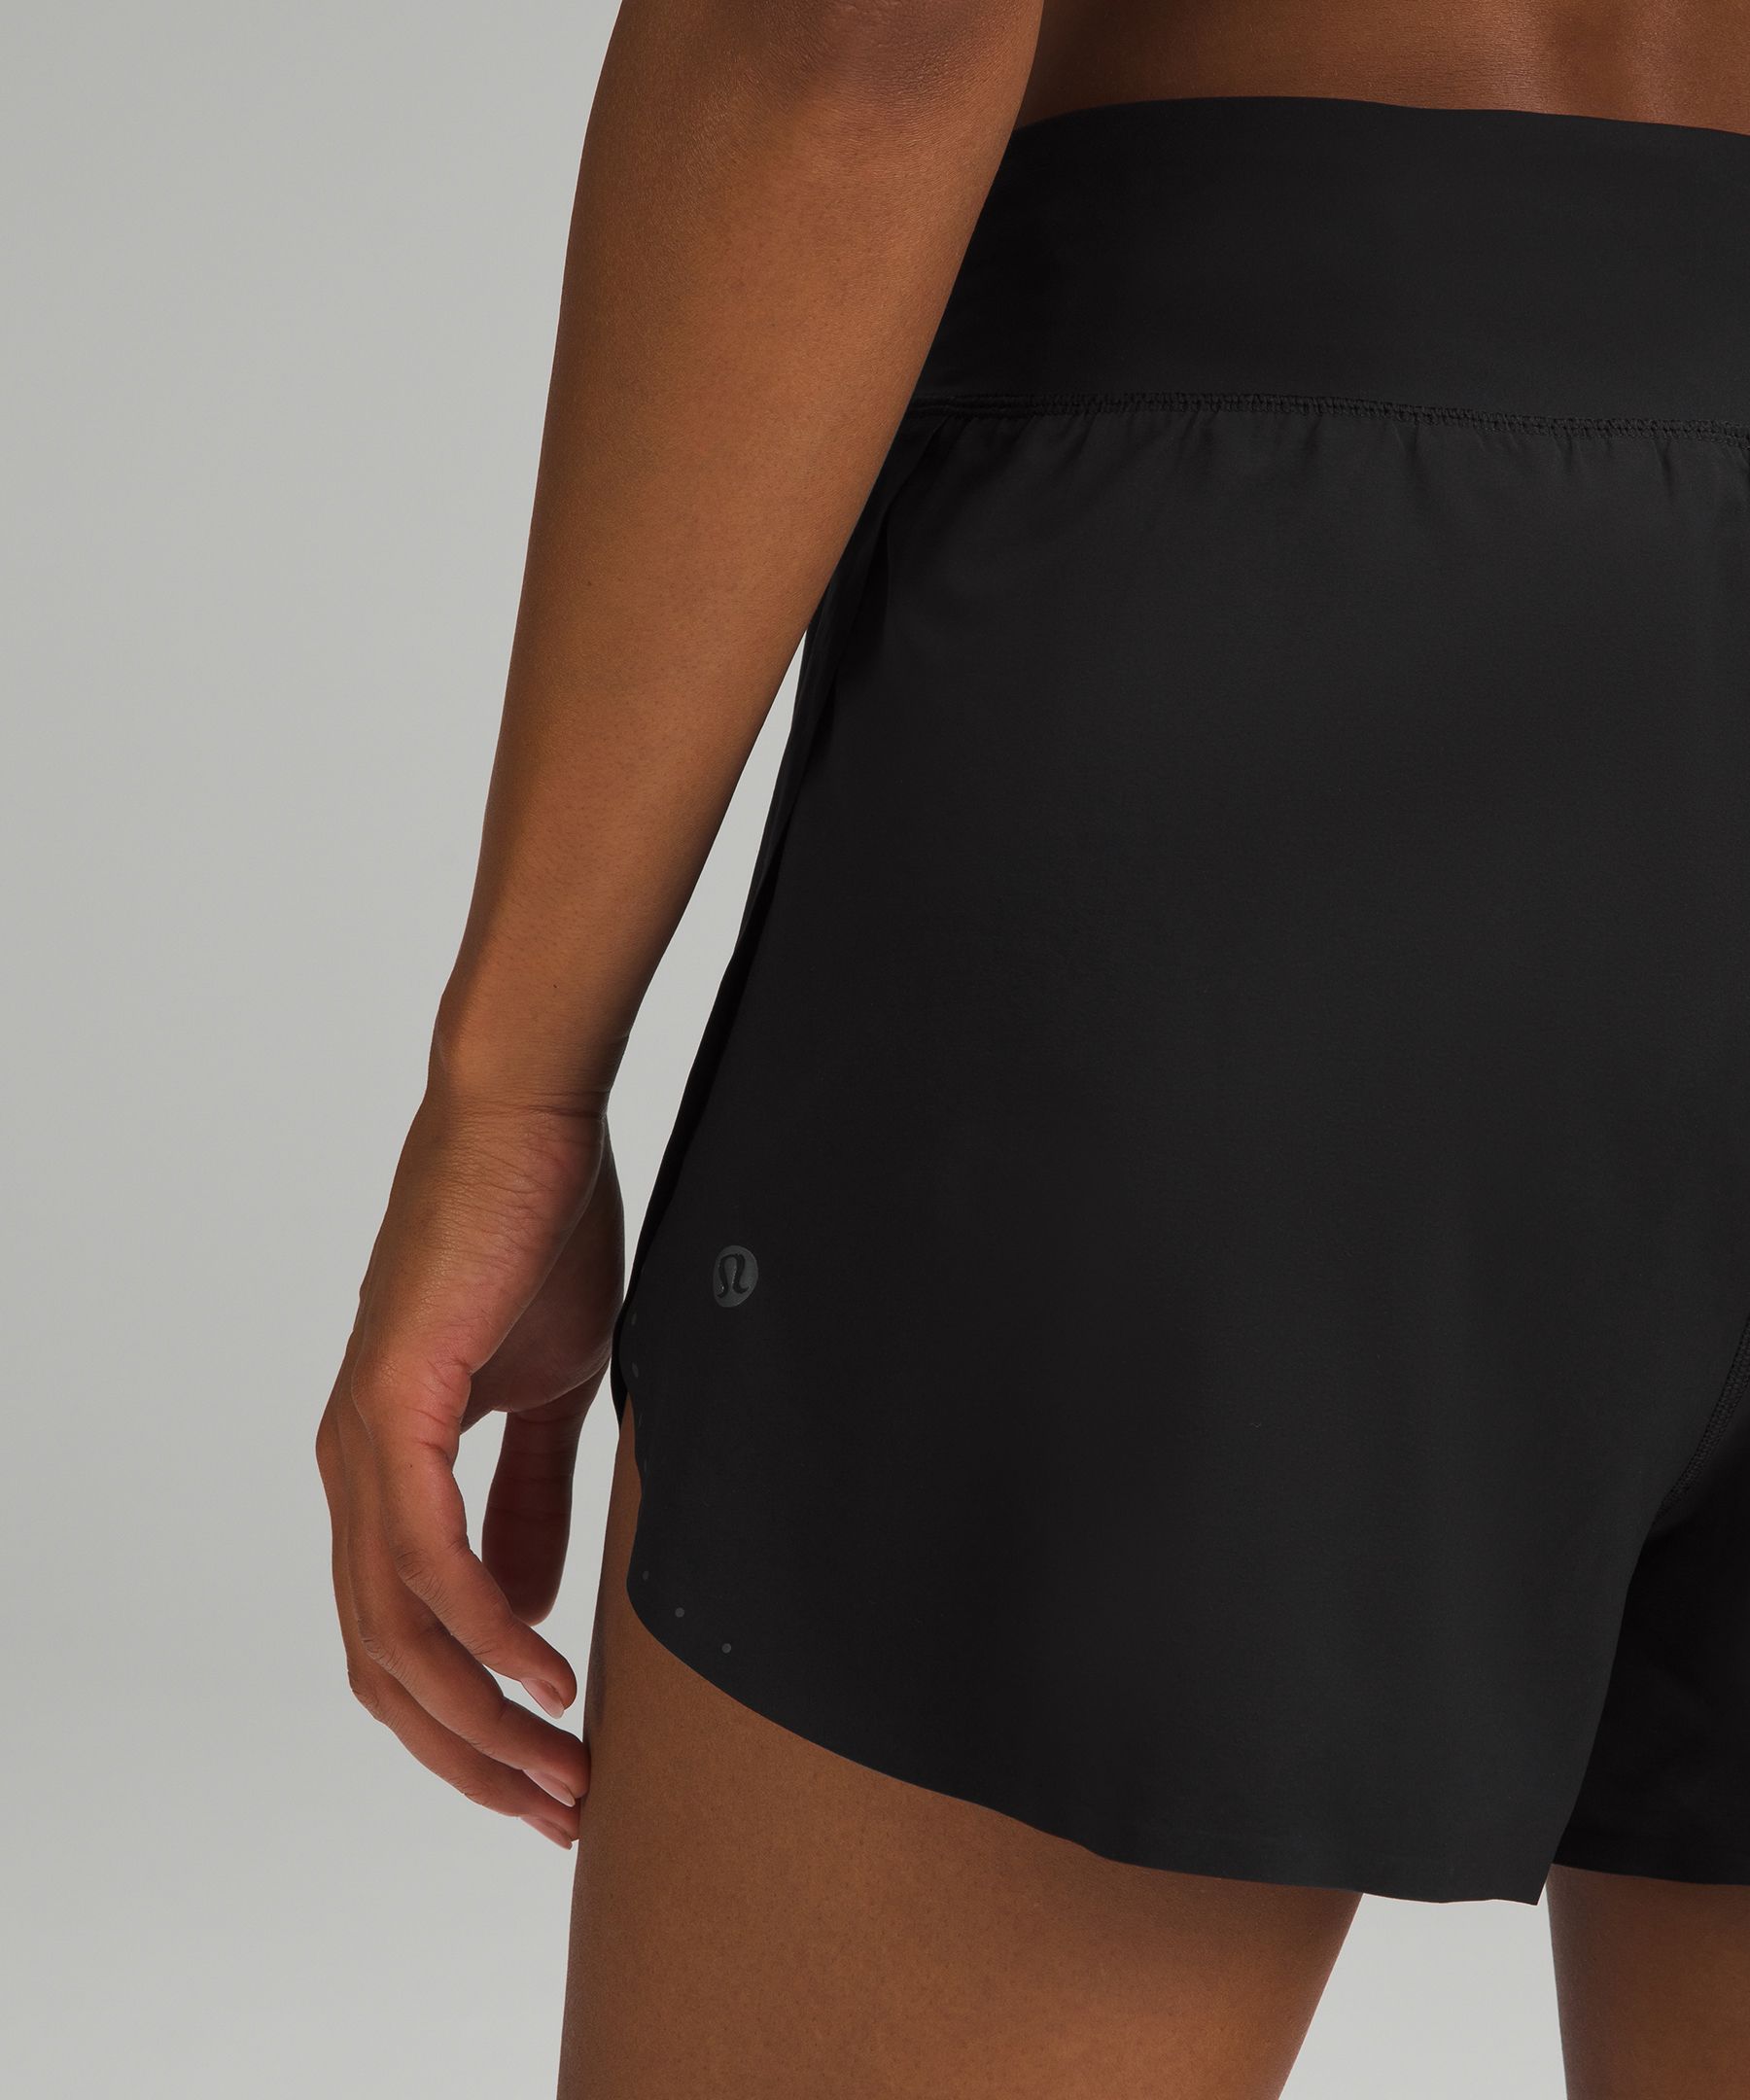 Lululemon Fast & Free shorts look for less from  #summershorts  #workoutclothes #fashion 